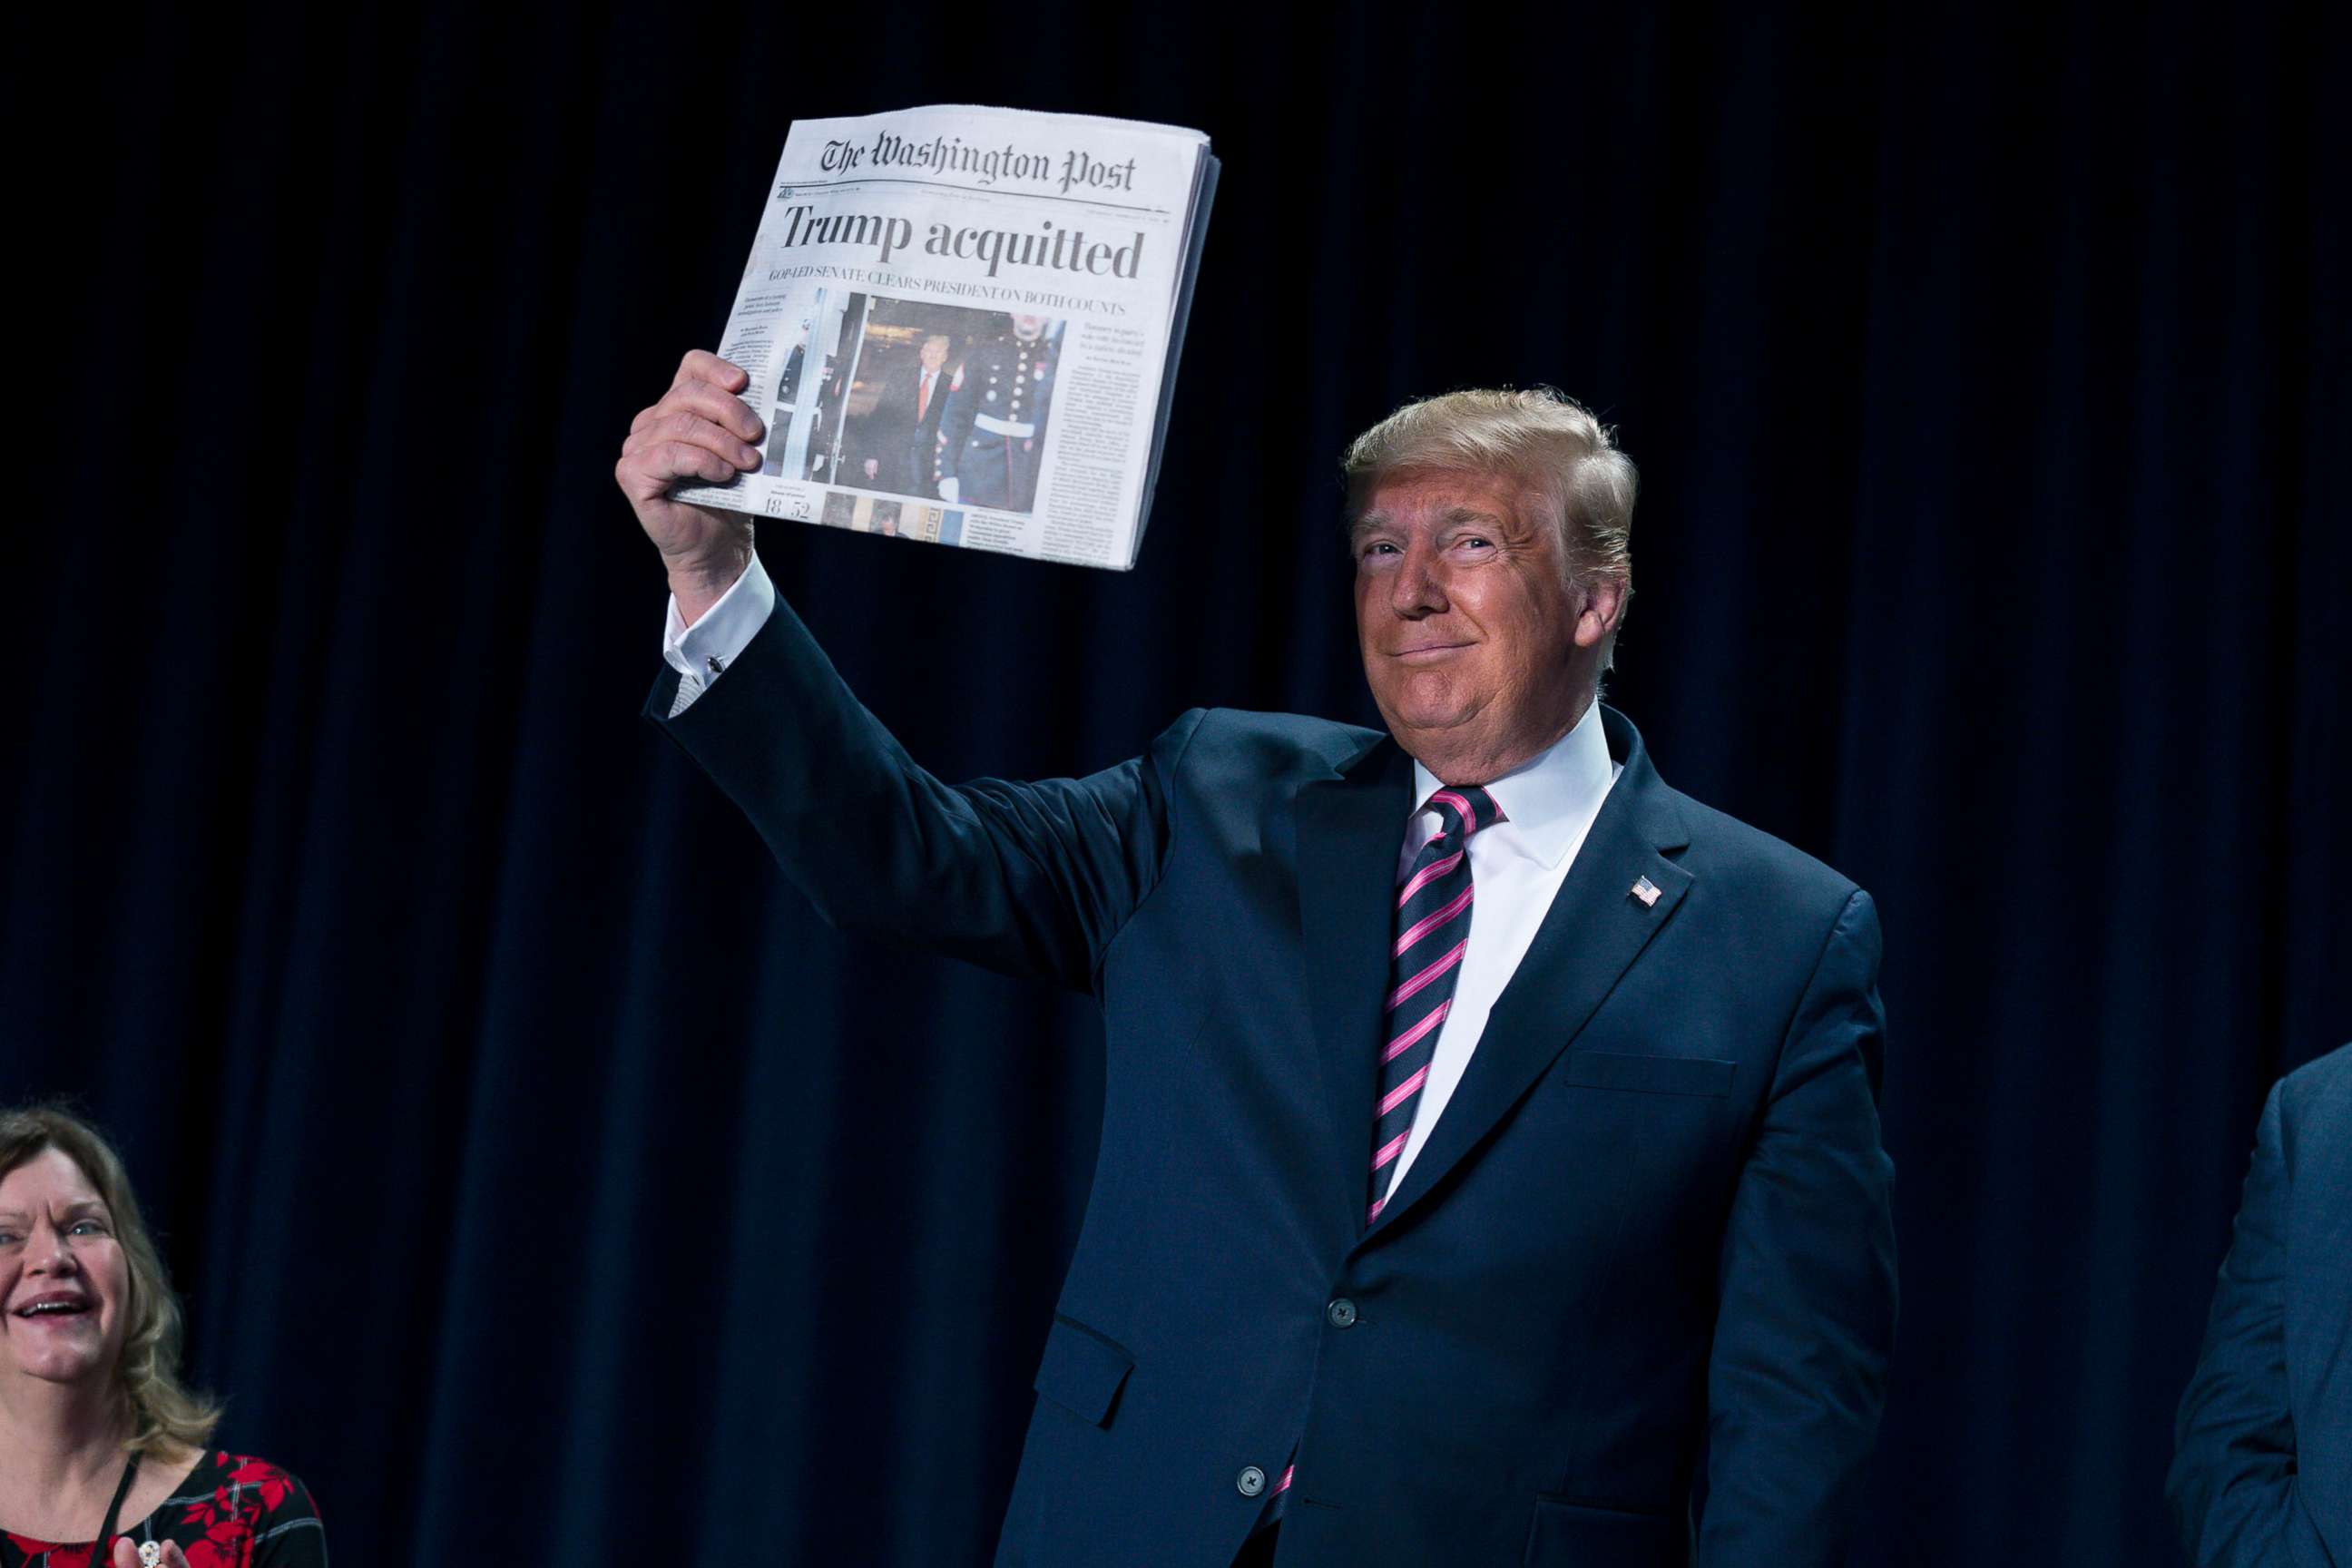 PHOTO: President Donald Trump holds up a newspaper with the headline that reads "Trump acquitted" during the 68th annual National Prayer Breakfast, Feb. 6, 2020, in Washington, D.C.